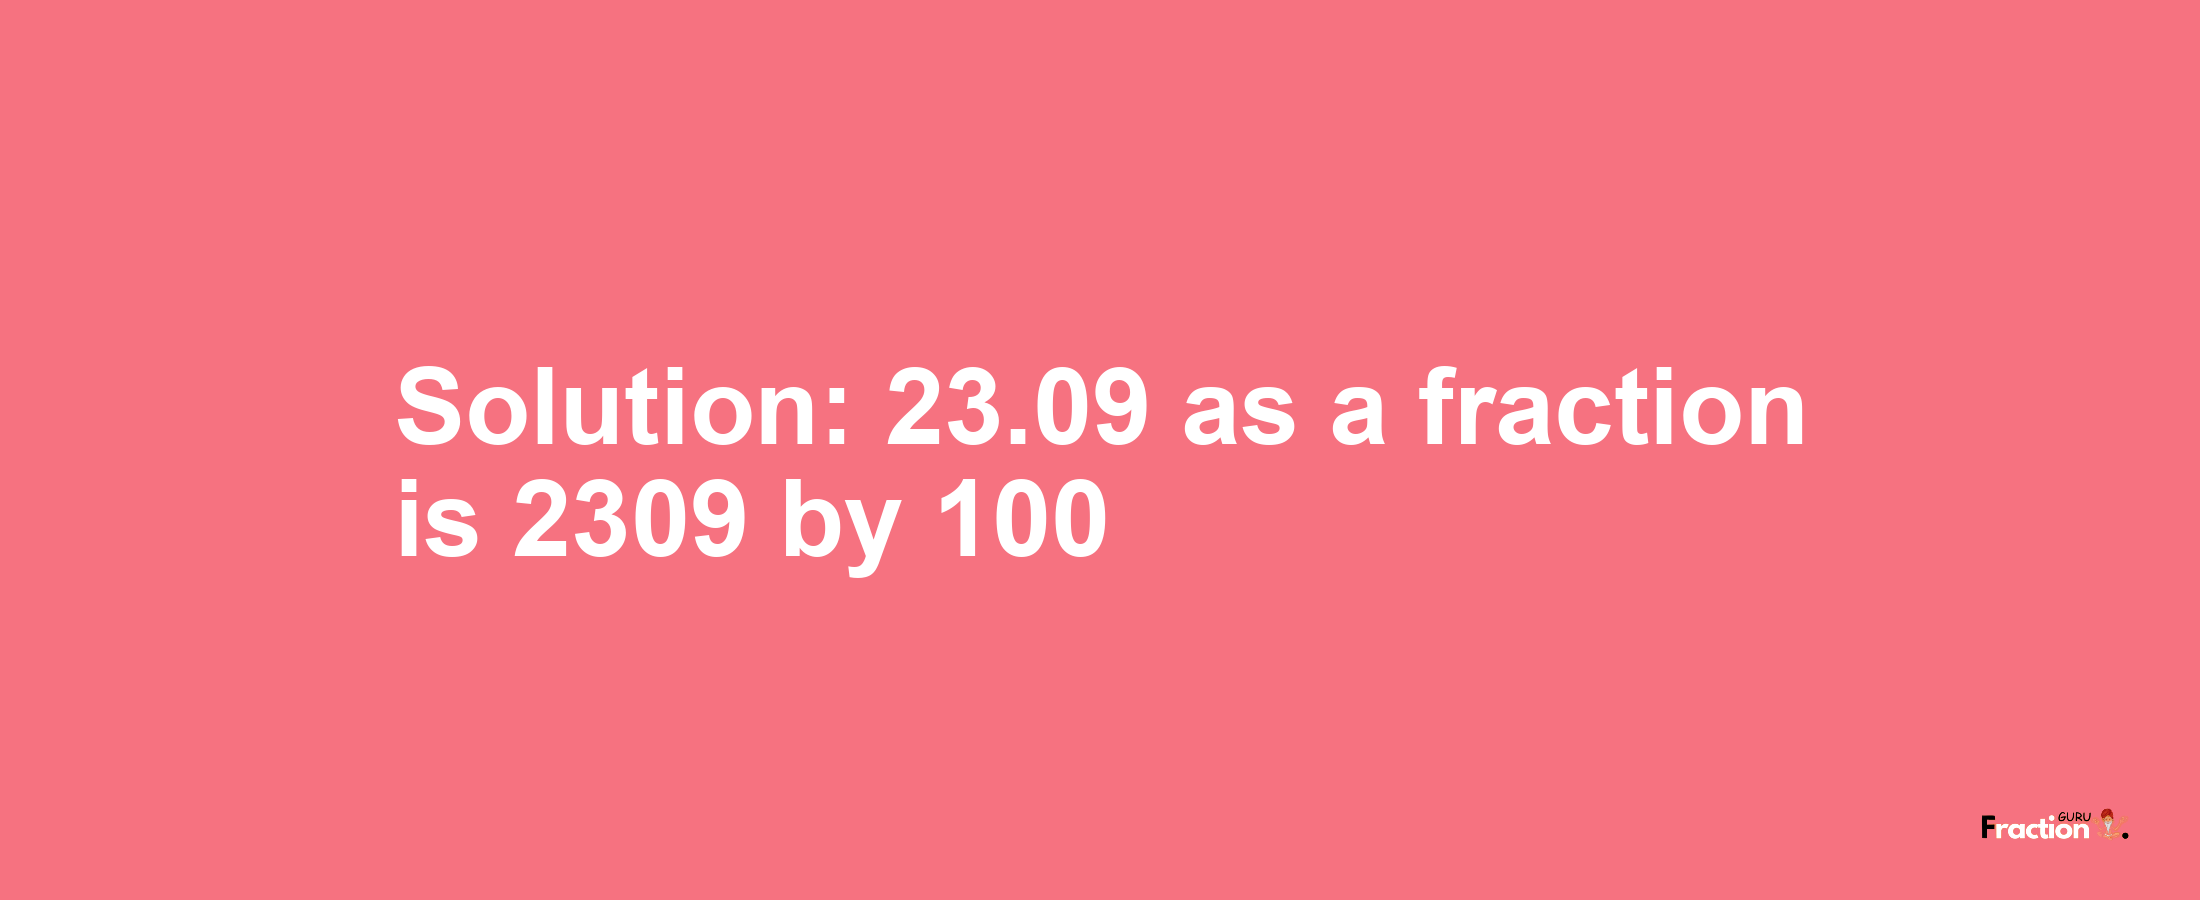 Solution:23.09 as a fraction is 2309/100